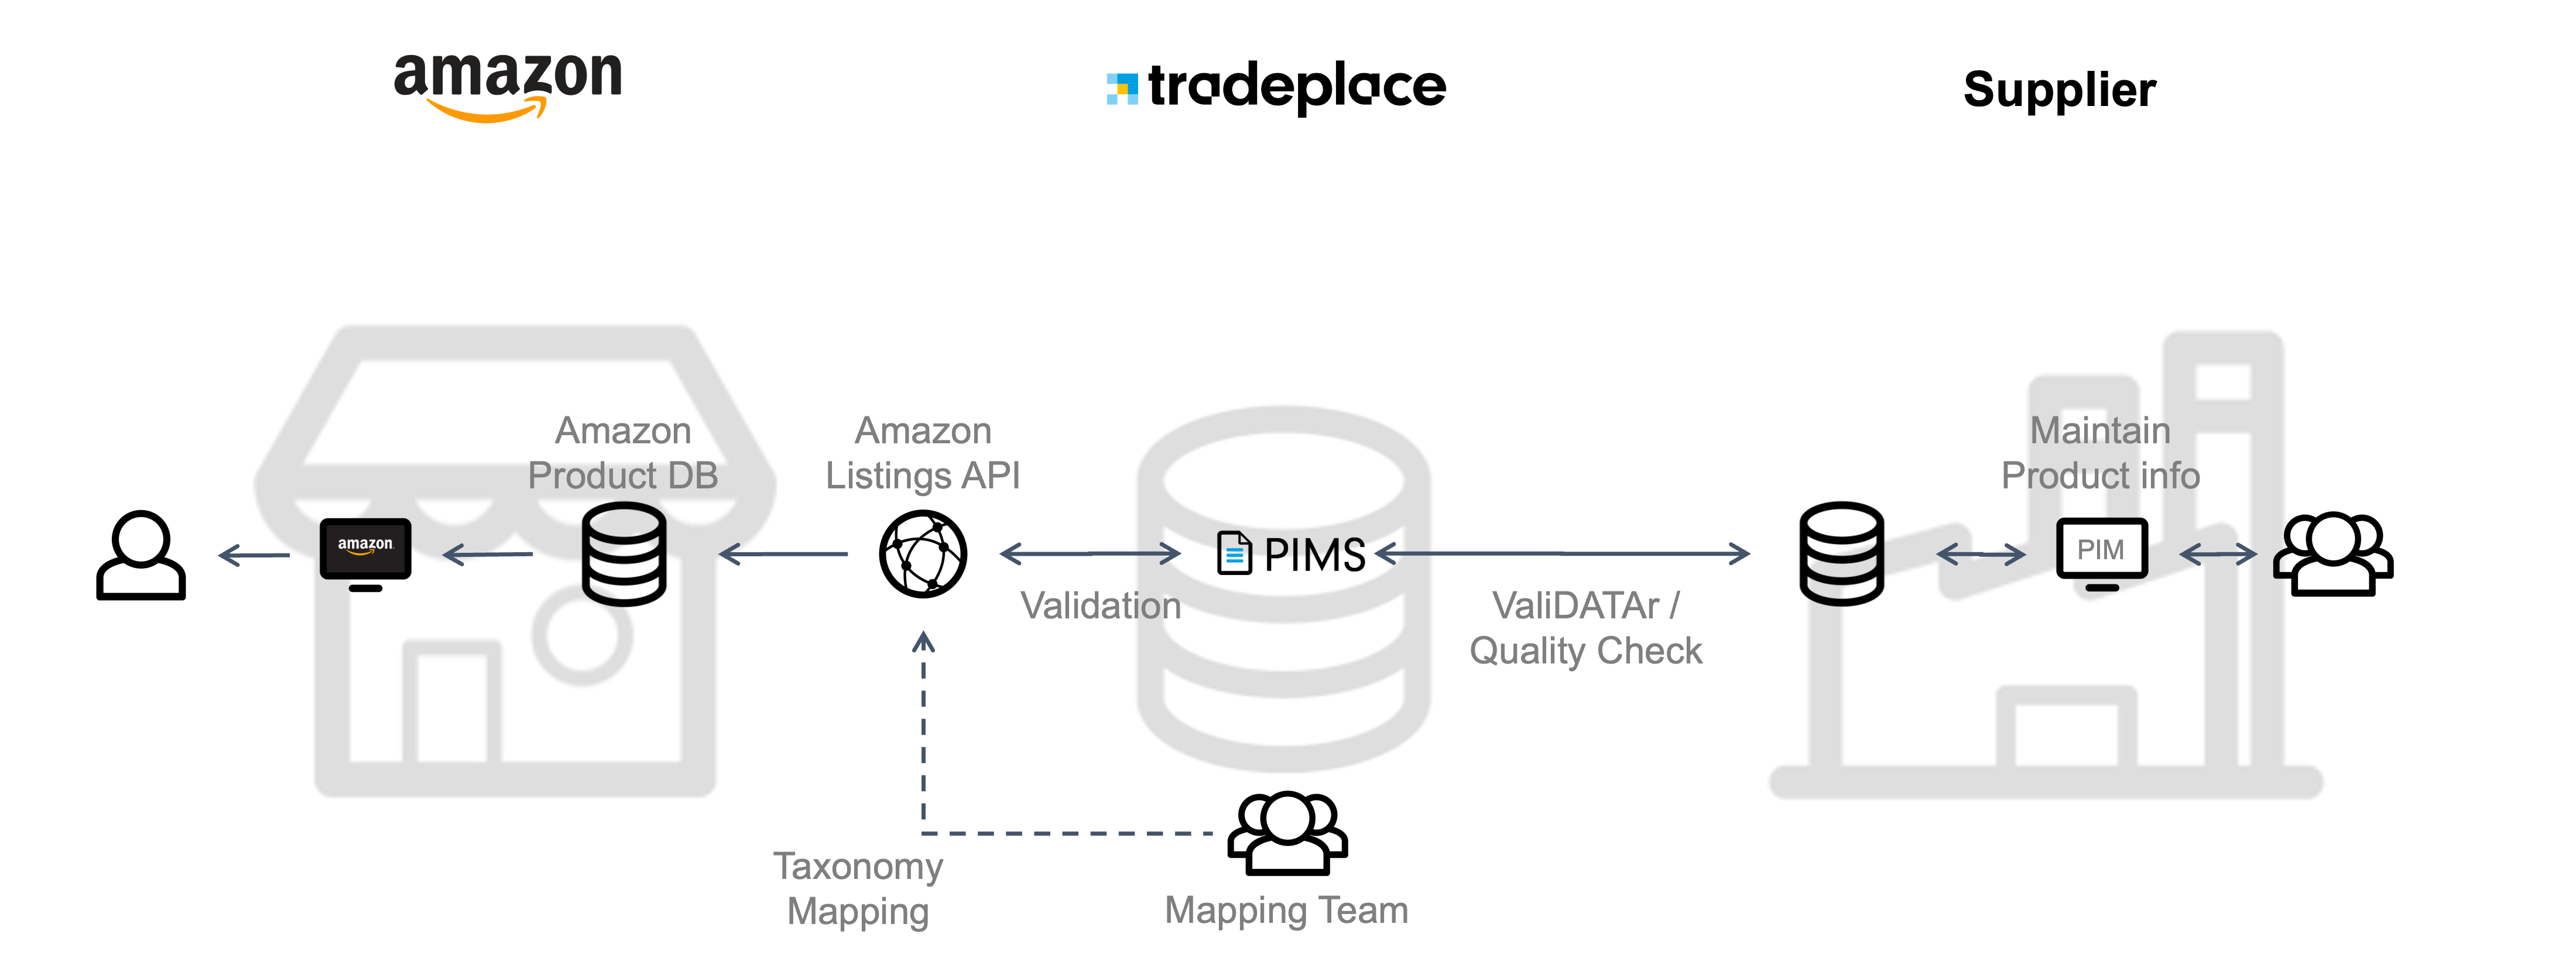 Tradeplace_Amazon_Listings_API_mapping_team